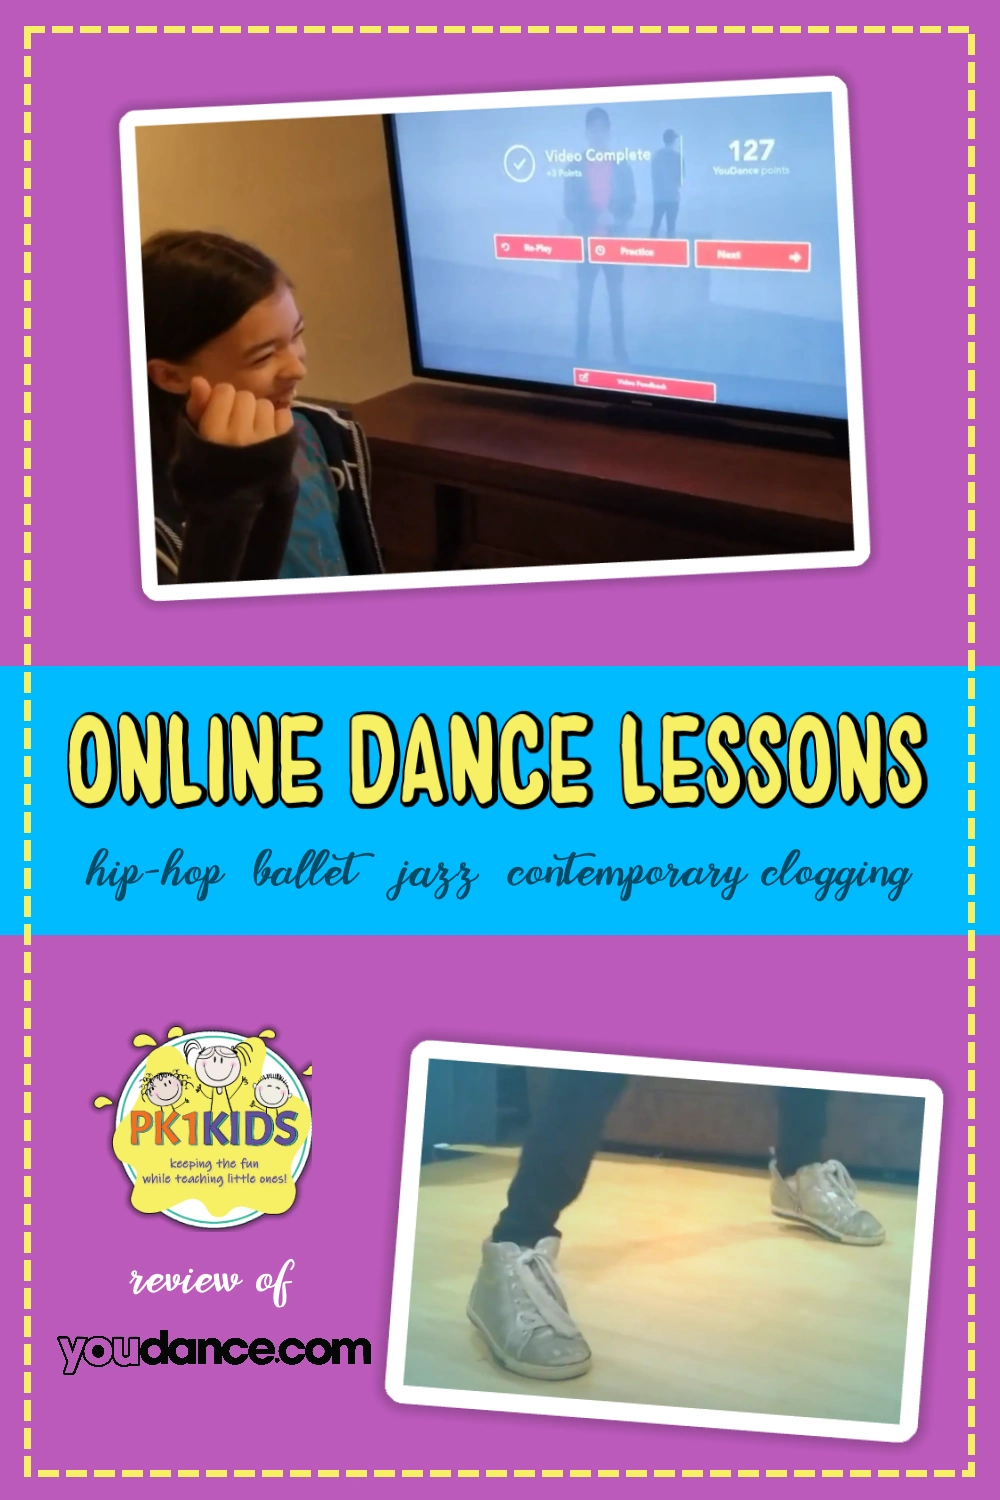 Online Dance Lessons For Kids from YouDance.com